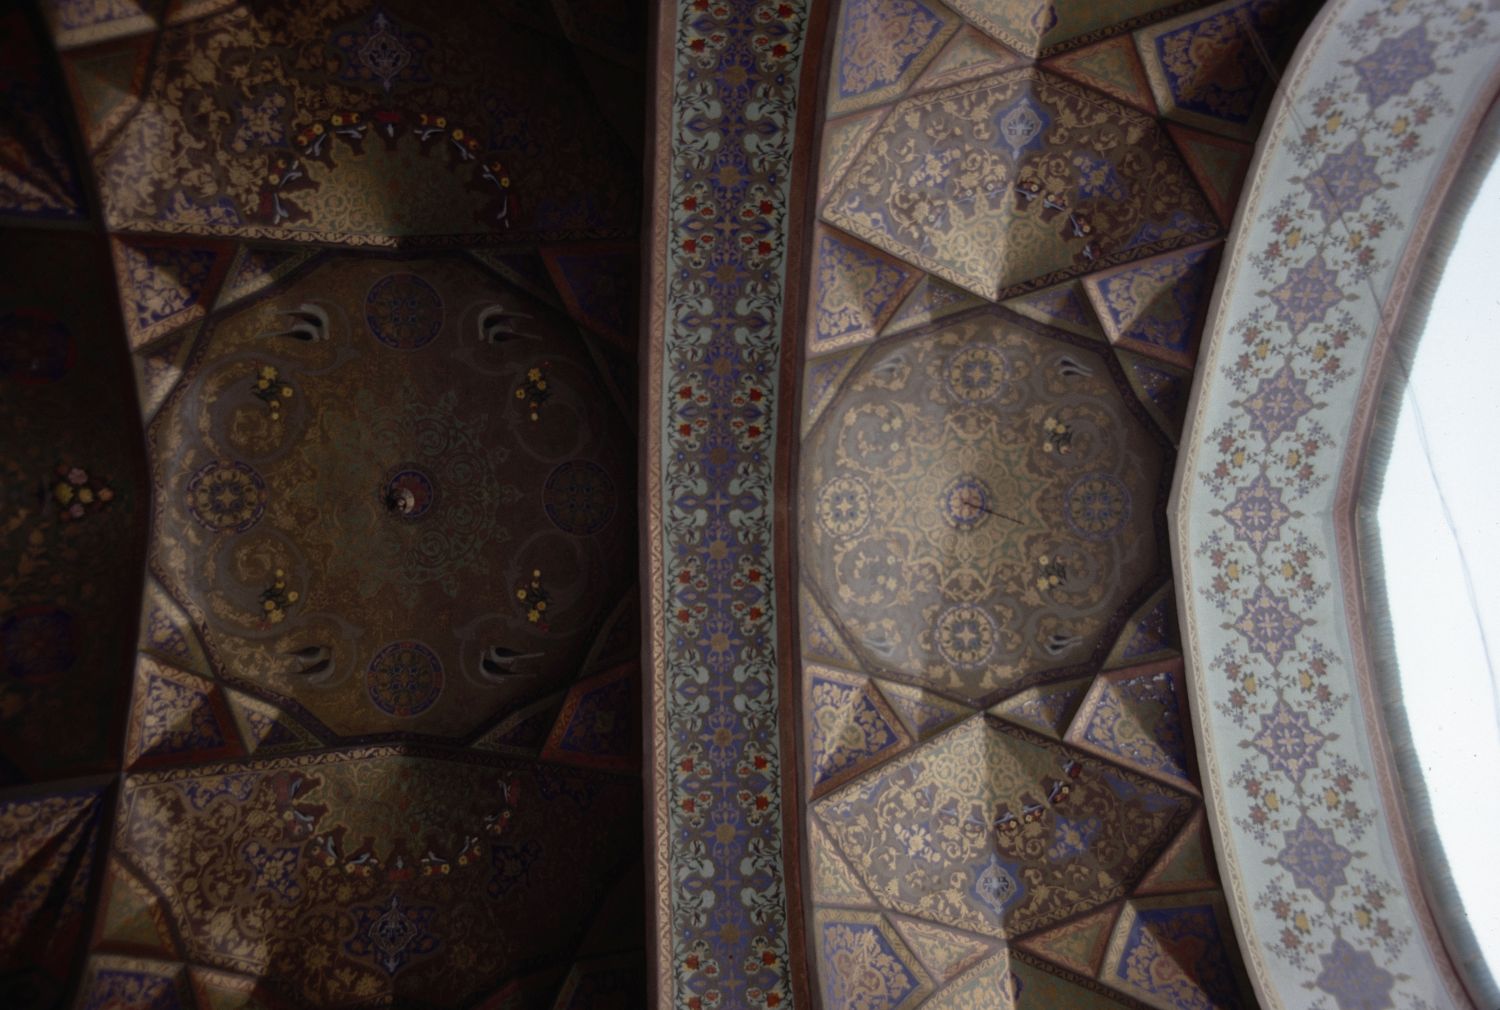 Marqad-i Sultan 'Ali ibn Imam Muhammad Baqir - View of vault over one of the iwans.